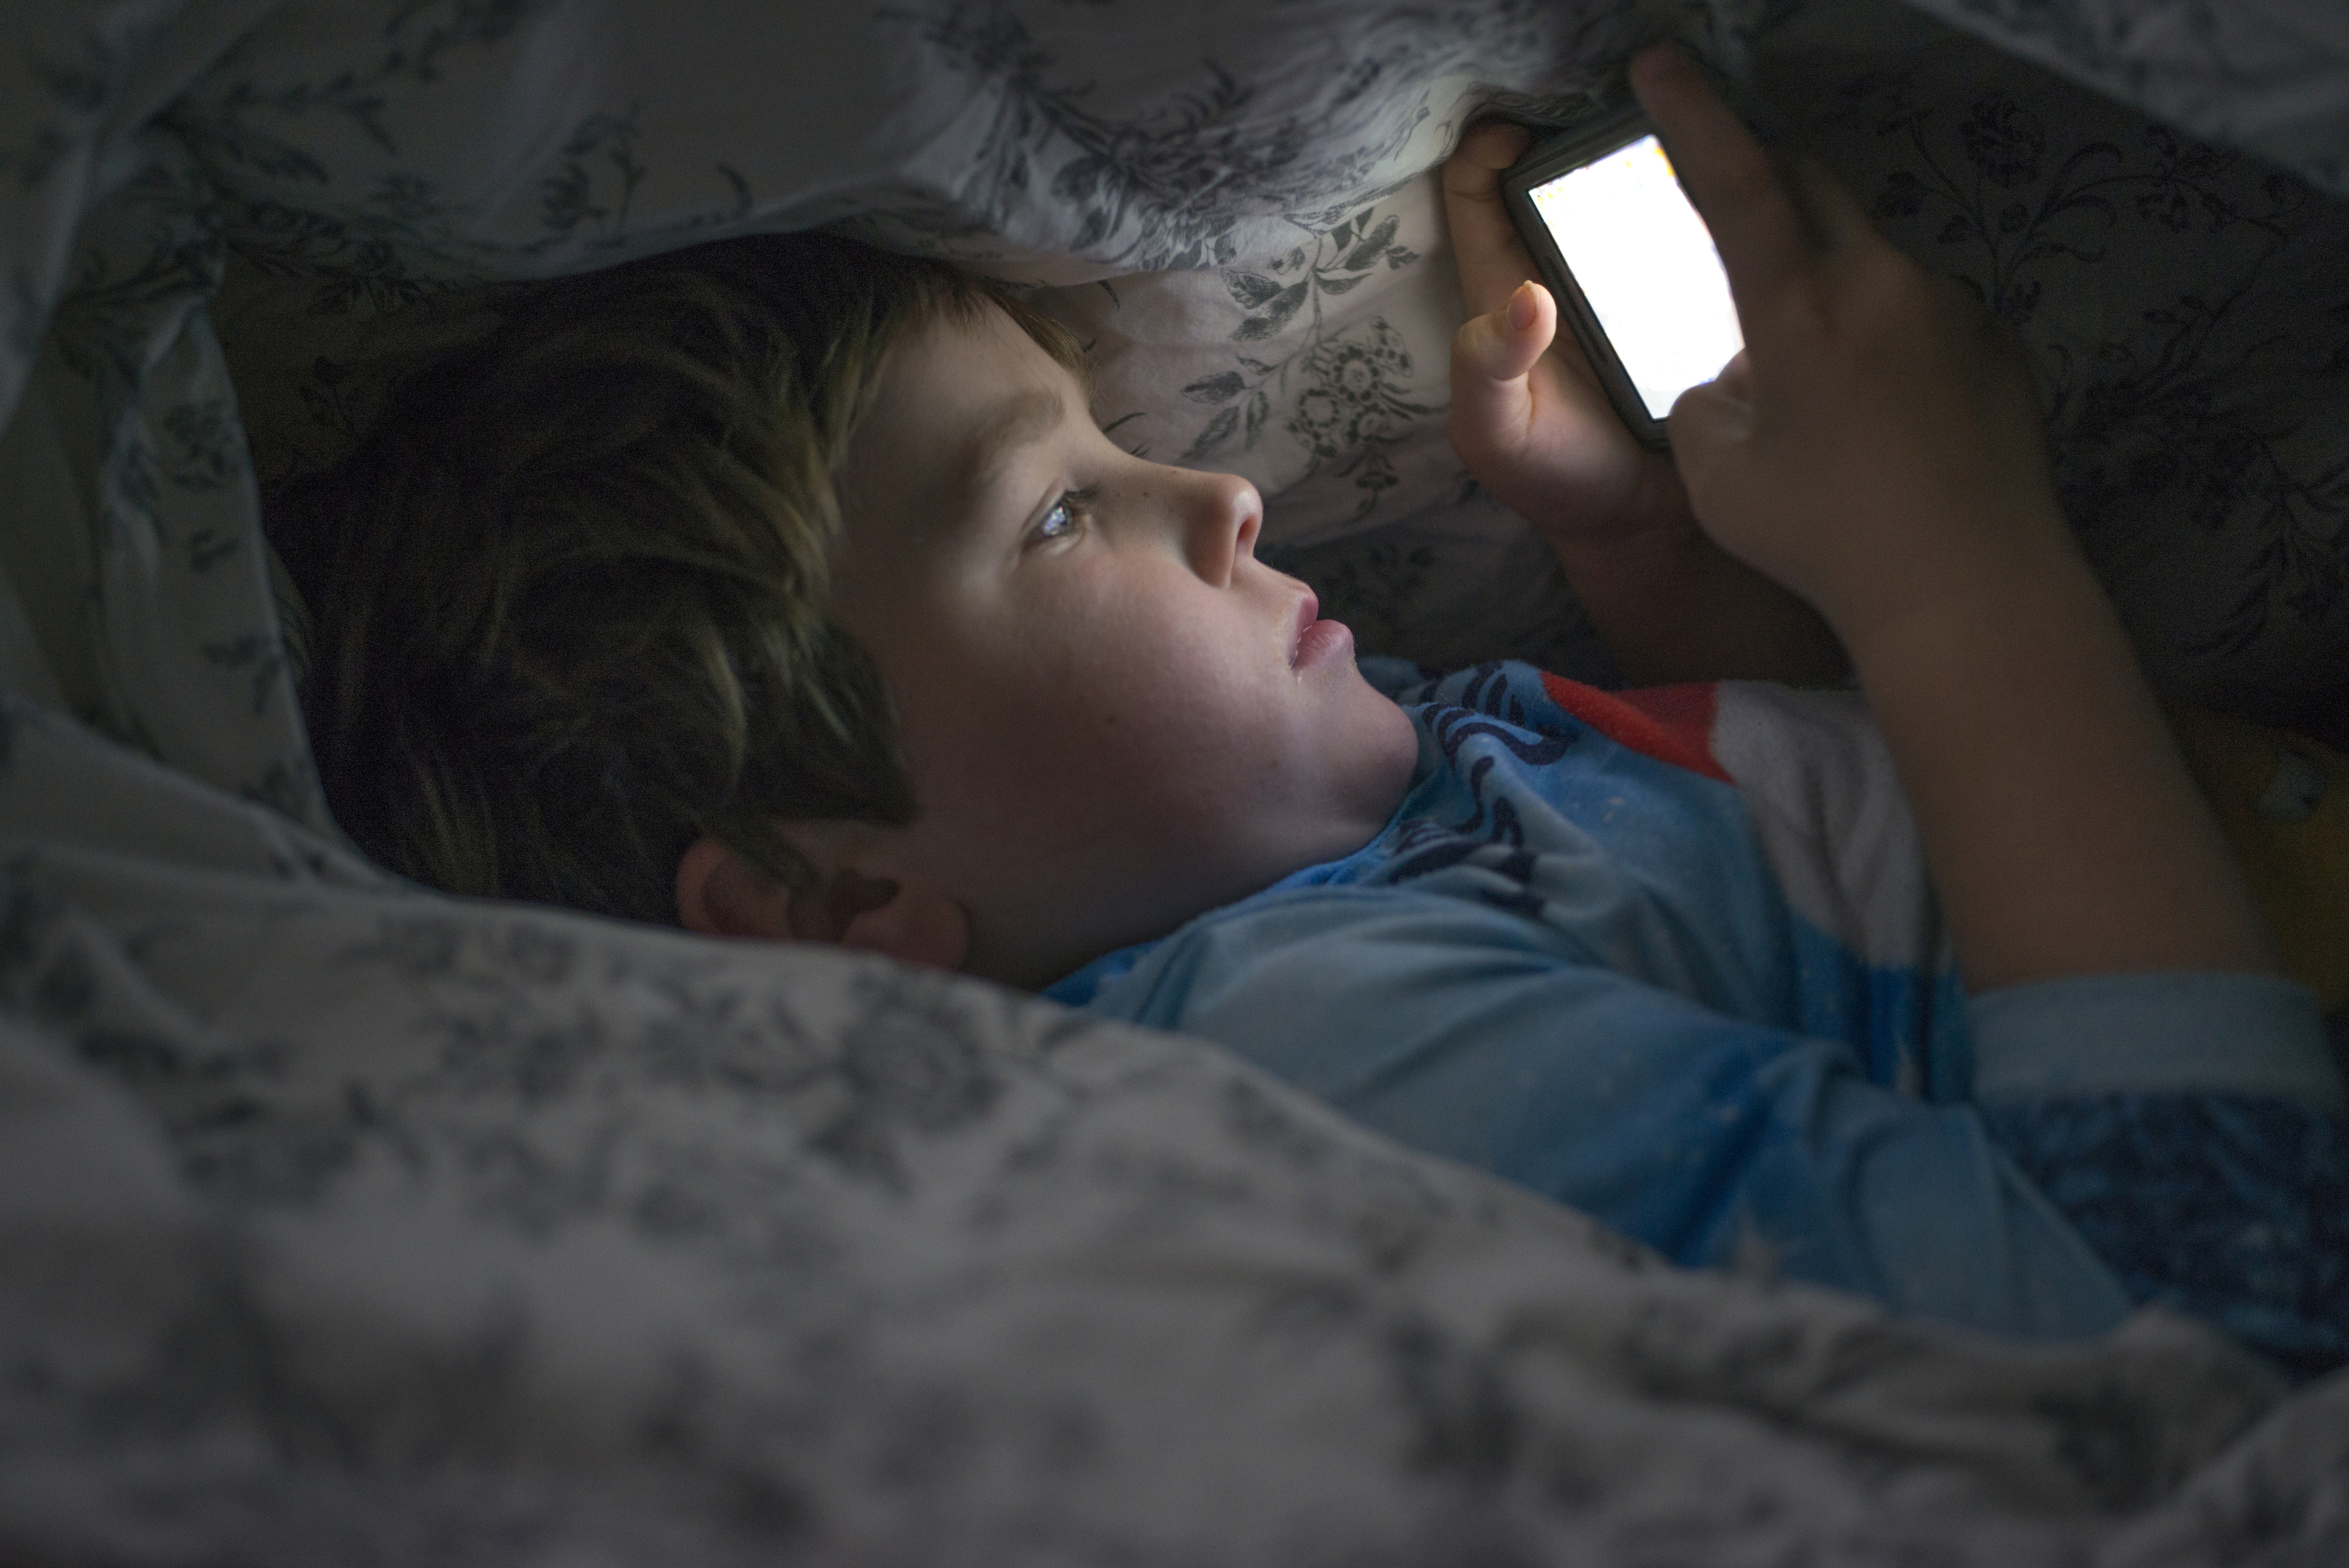 88% of parents admitted there are potential risks to children found in cyberspace (iStock)